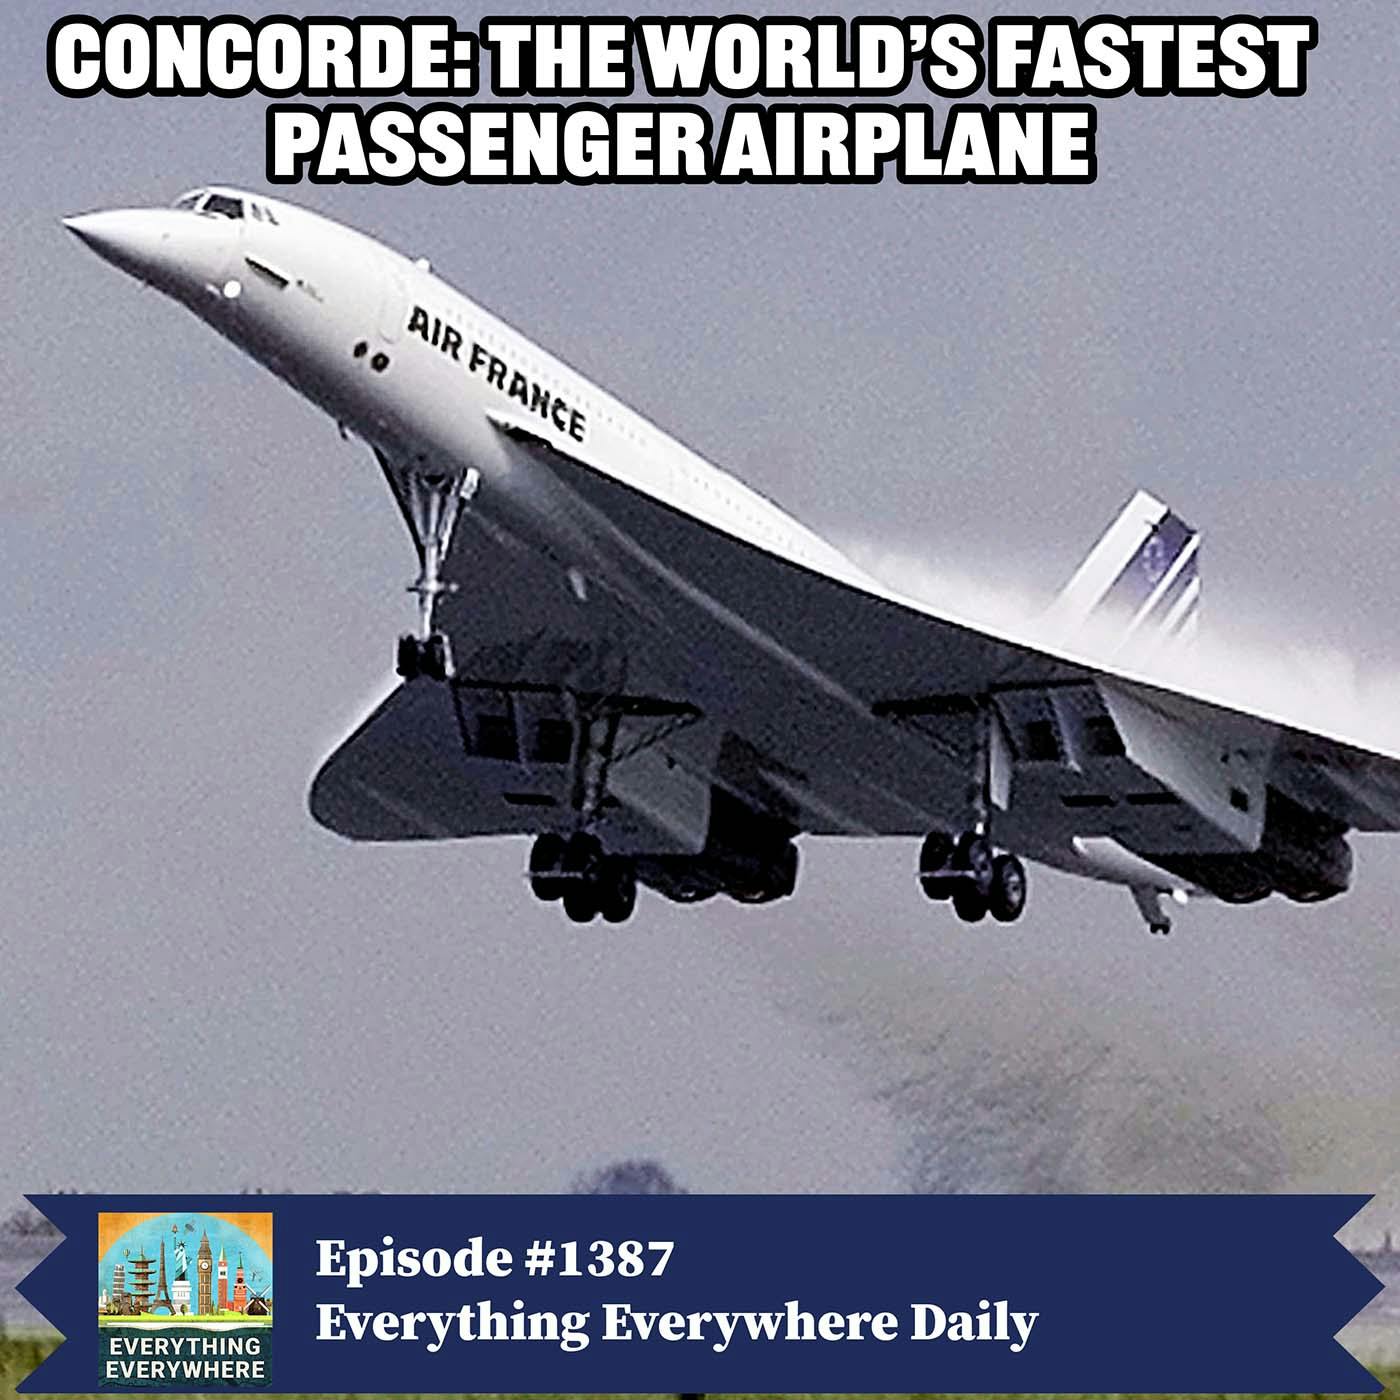 Concorde: The World’s Fastest Passenger Airplane